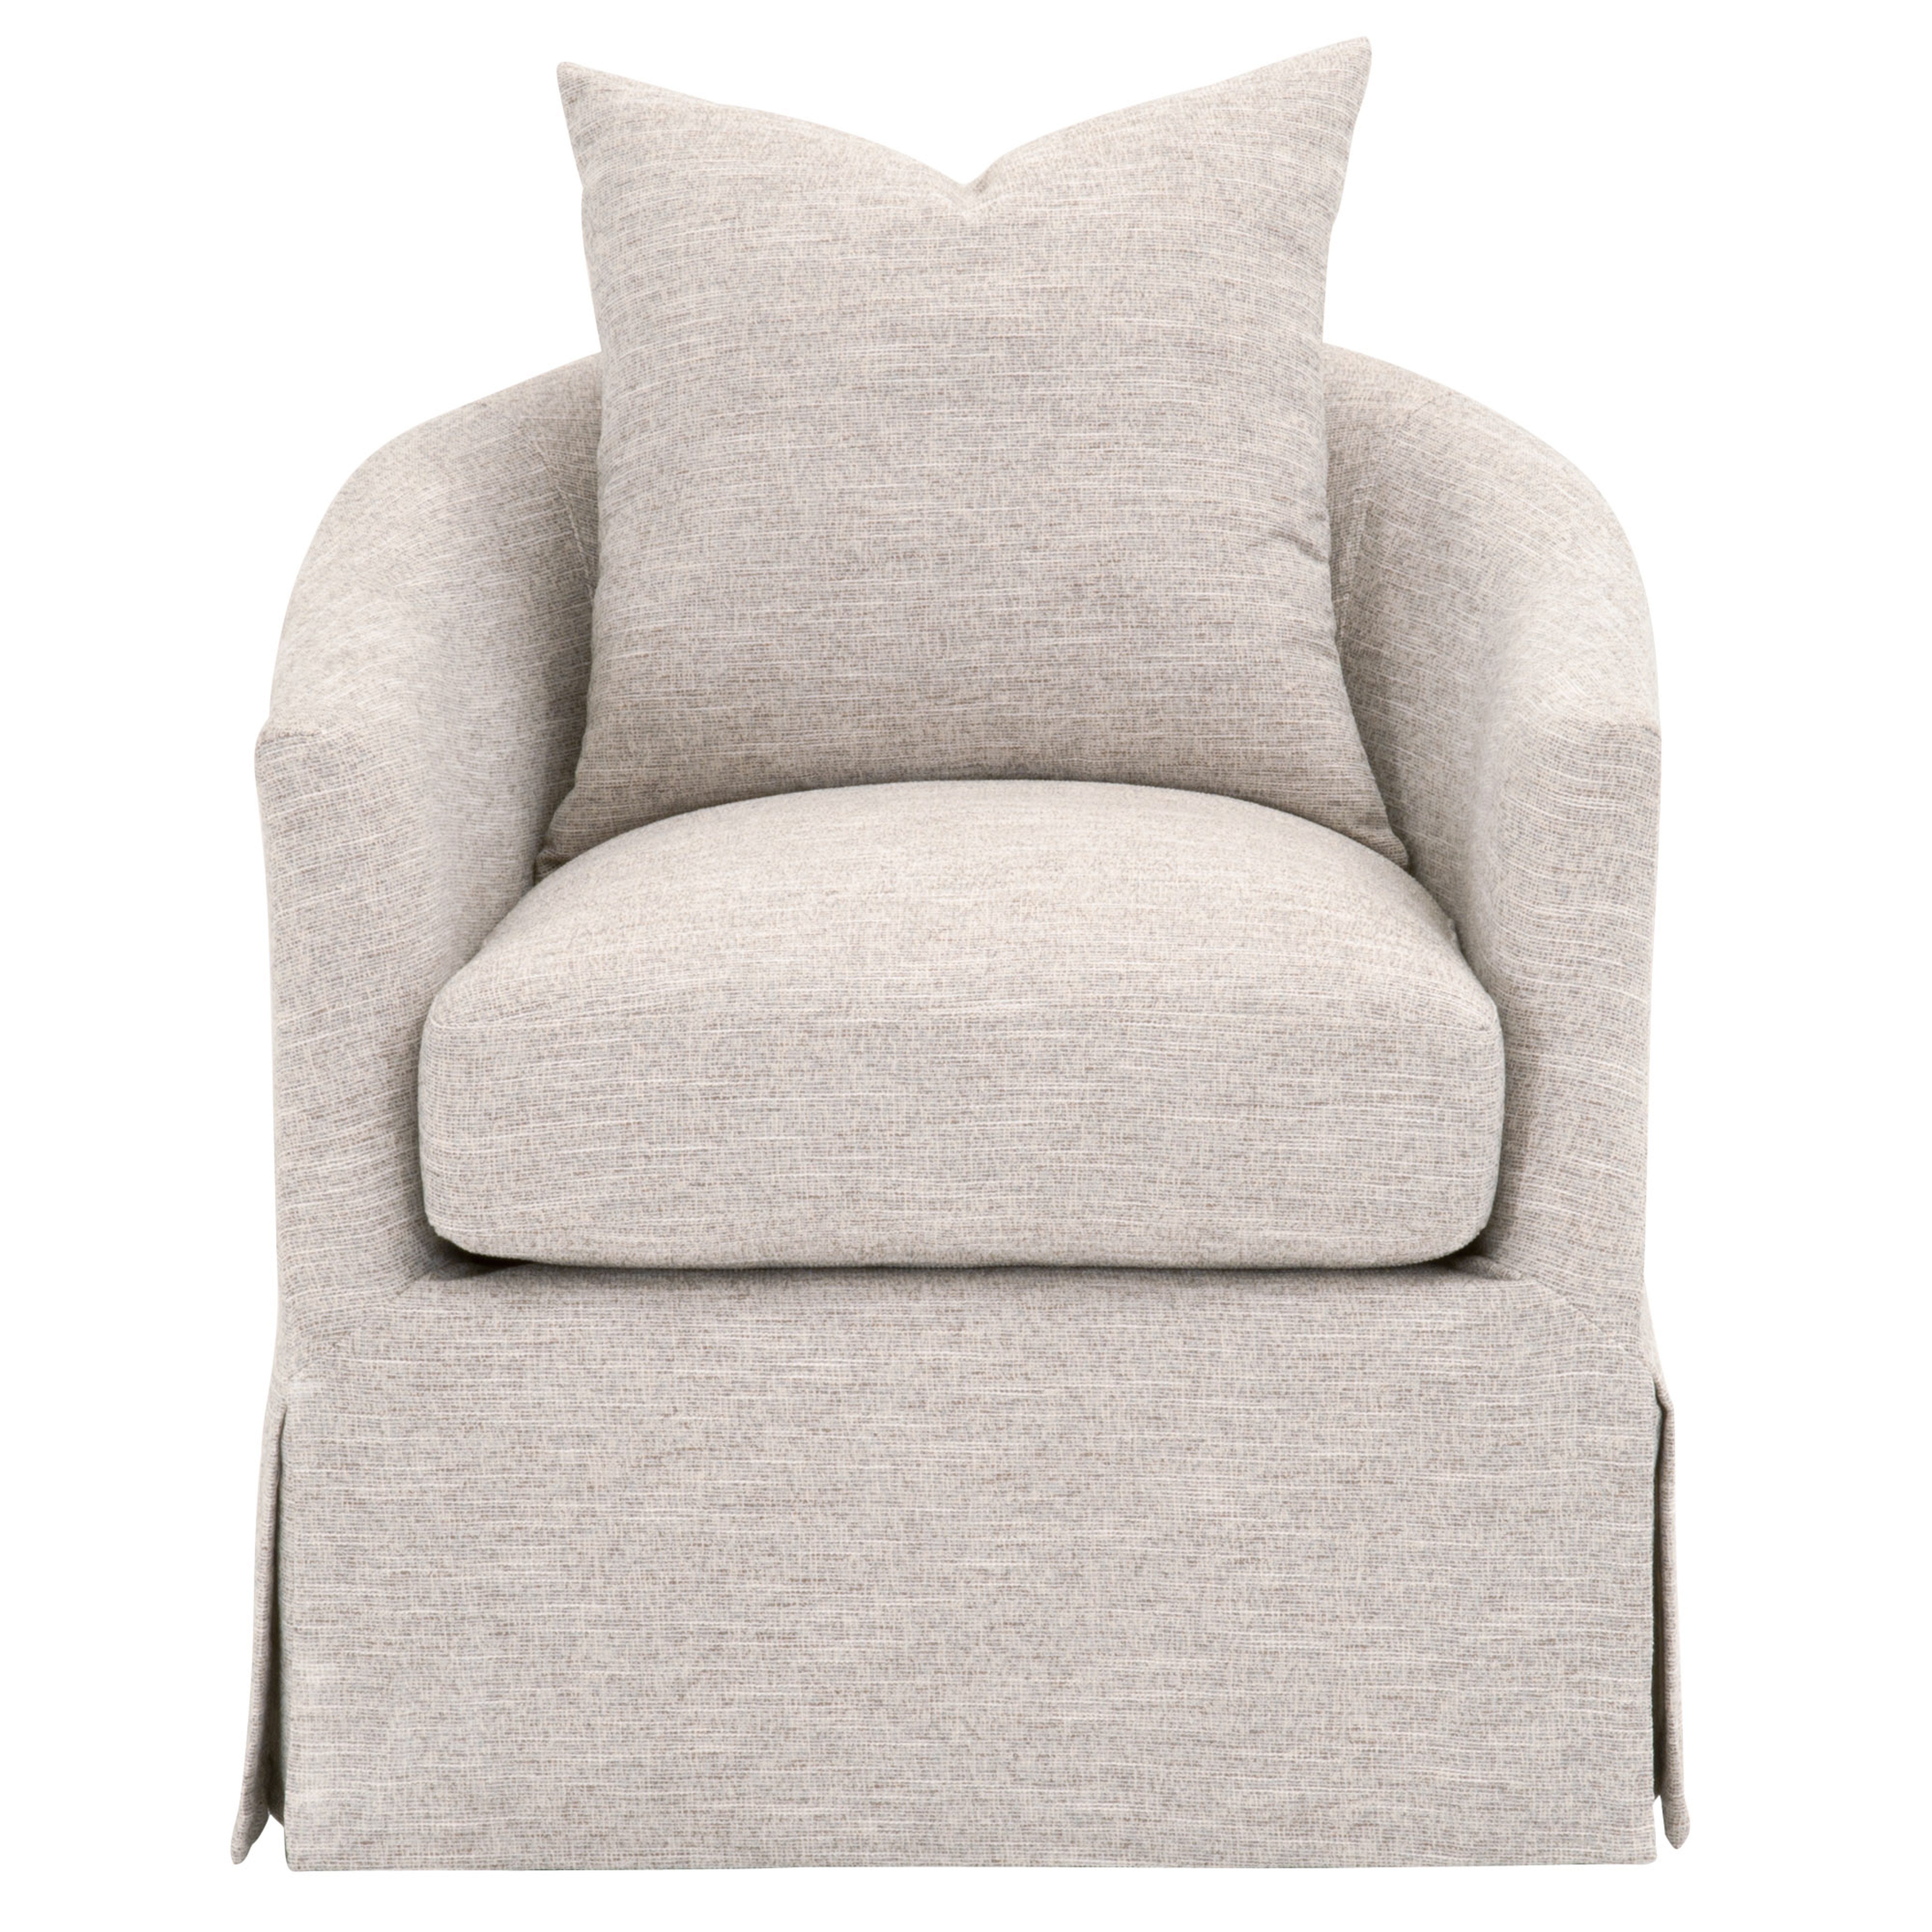 Faye Slipcover Swivel Club Chair, Taupe - Alder House